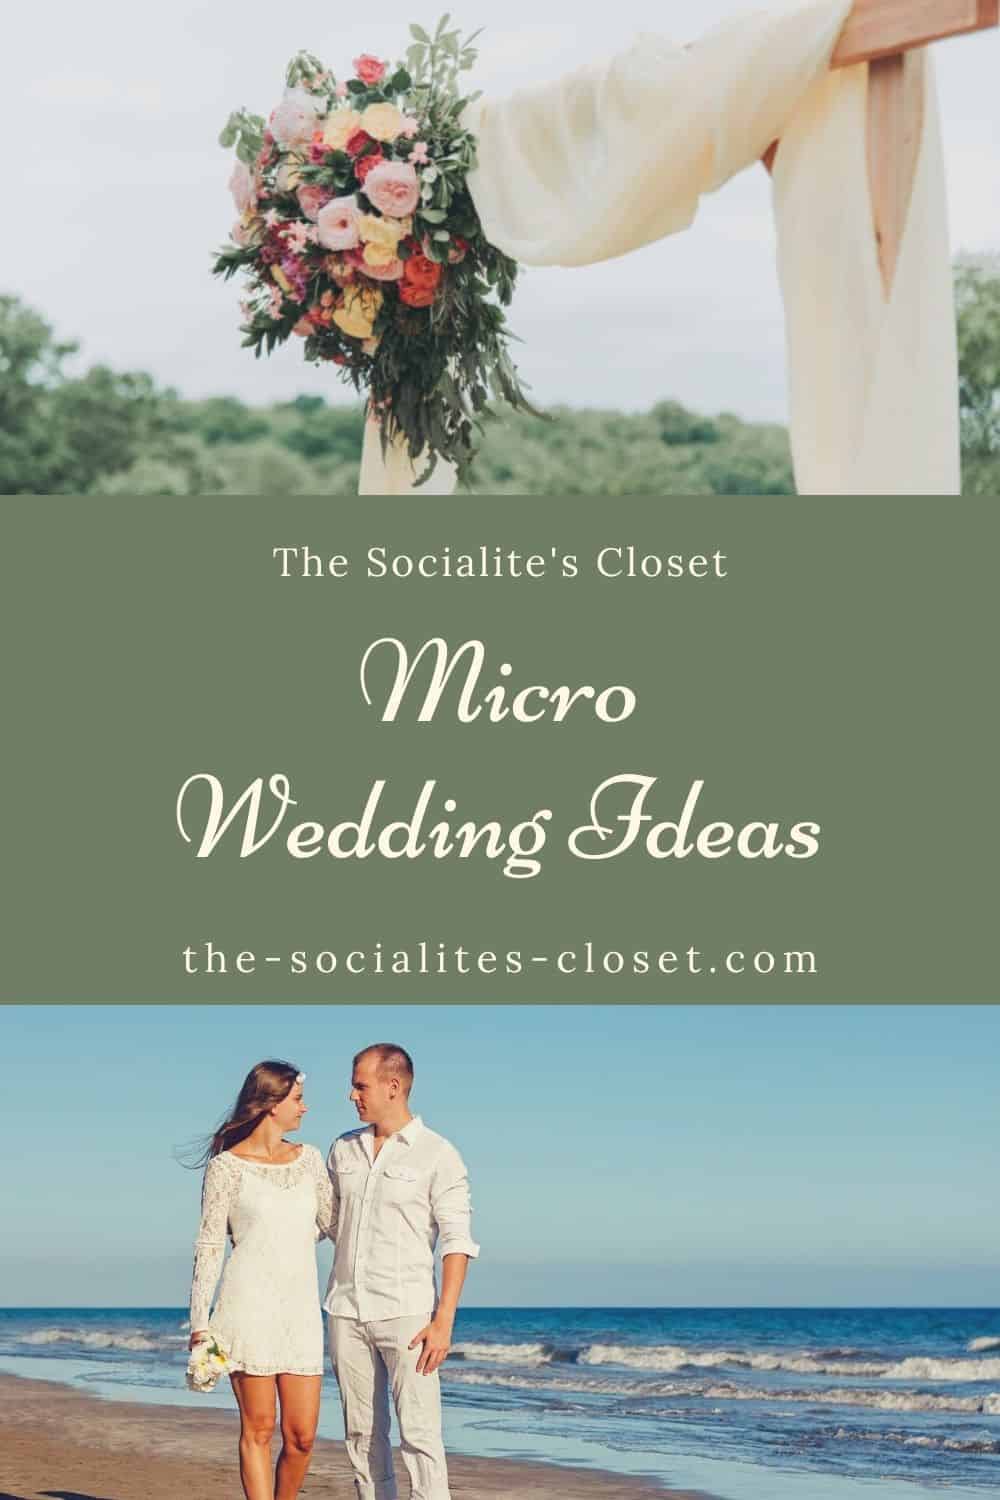 Planning a wedding can be overwhelming but micro weddings are the answer. They're easier, cheaper, and more meaningful than ever before. This quick guide will show you how to plan your own micro-wedding with ease! Step 1 – Pick Your Date; Step 2 – Select A Theme; etc. Successful micro weddings take planning so make sure you have all of this information handy for when it's time to start making decisions about food, flowers, decorating, and everything else that goes into hosting one unforgettable event! 